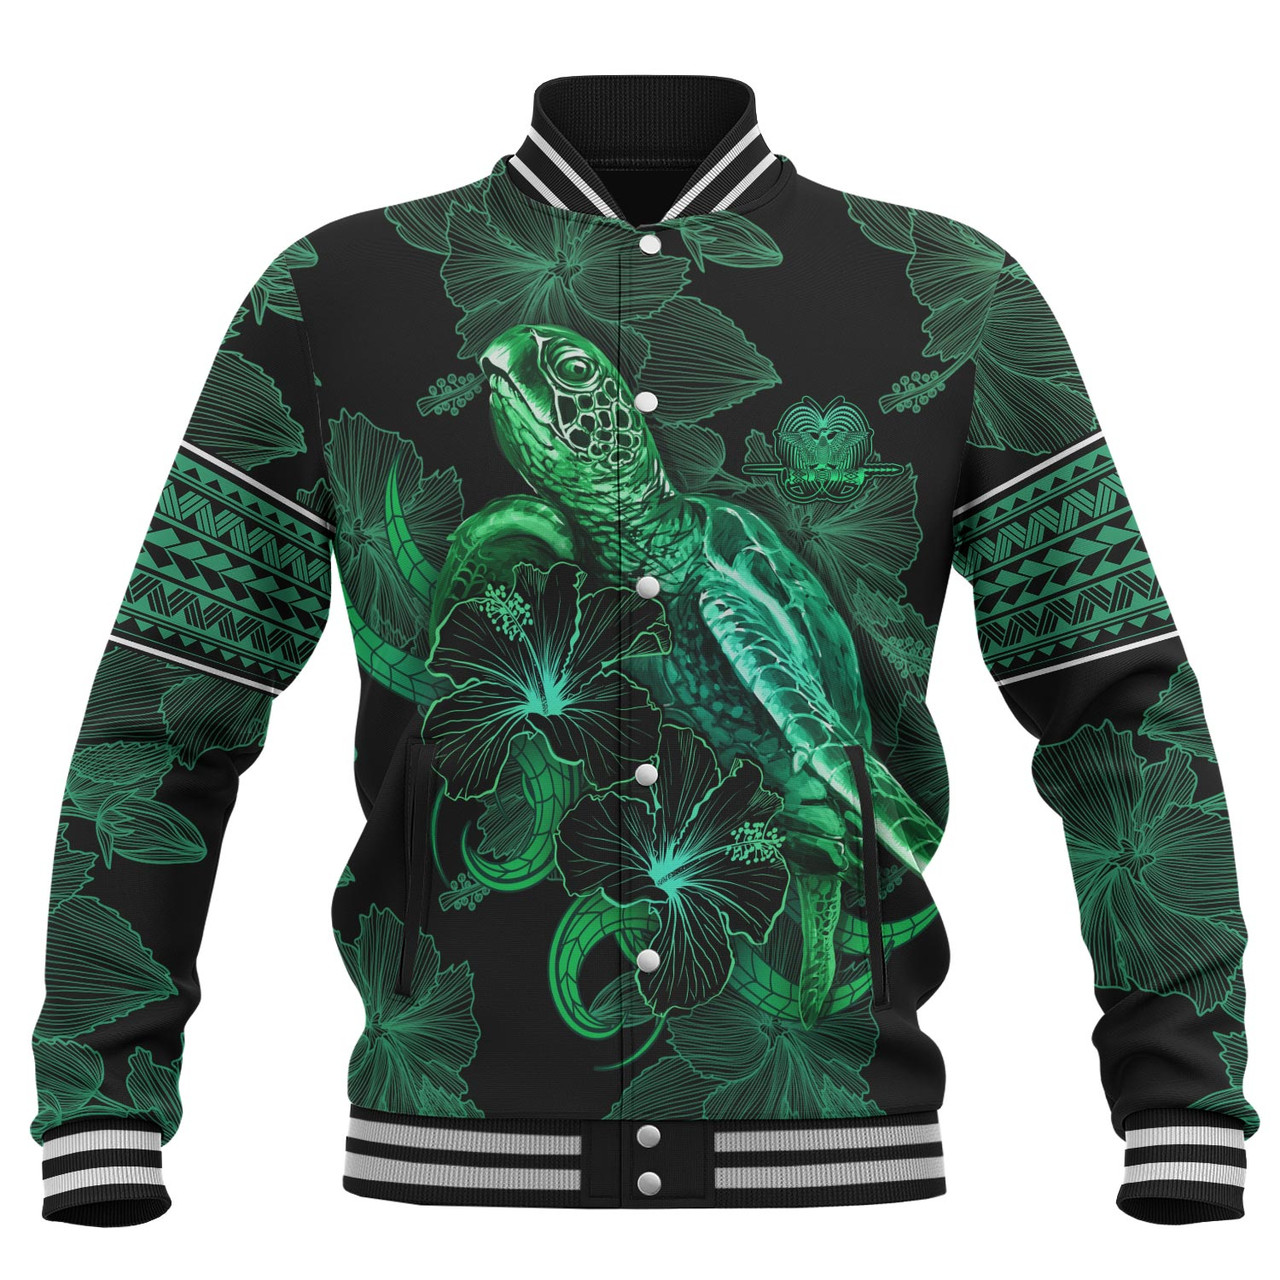 Papua New Guinea Baseball Jacket  Sea Turtle With Blooming Hibiscus Flowers Tribal Green